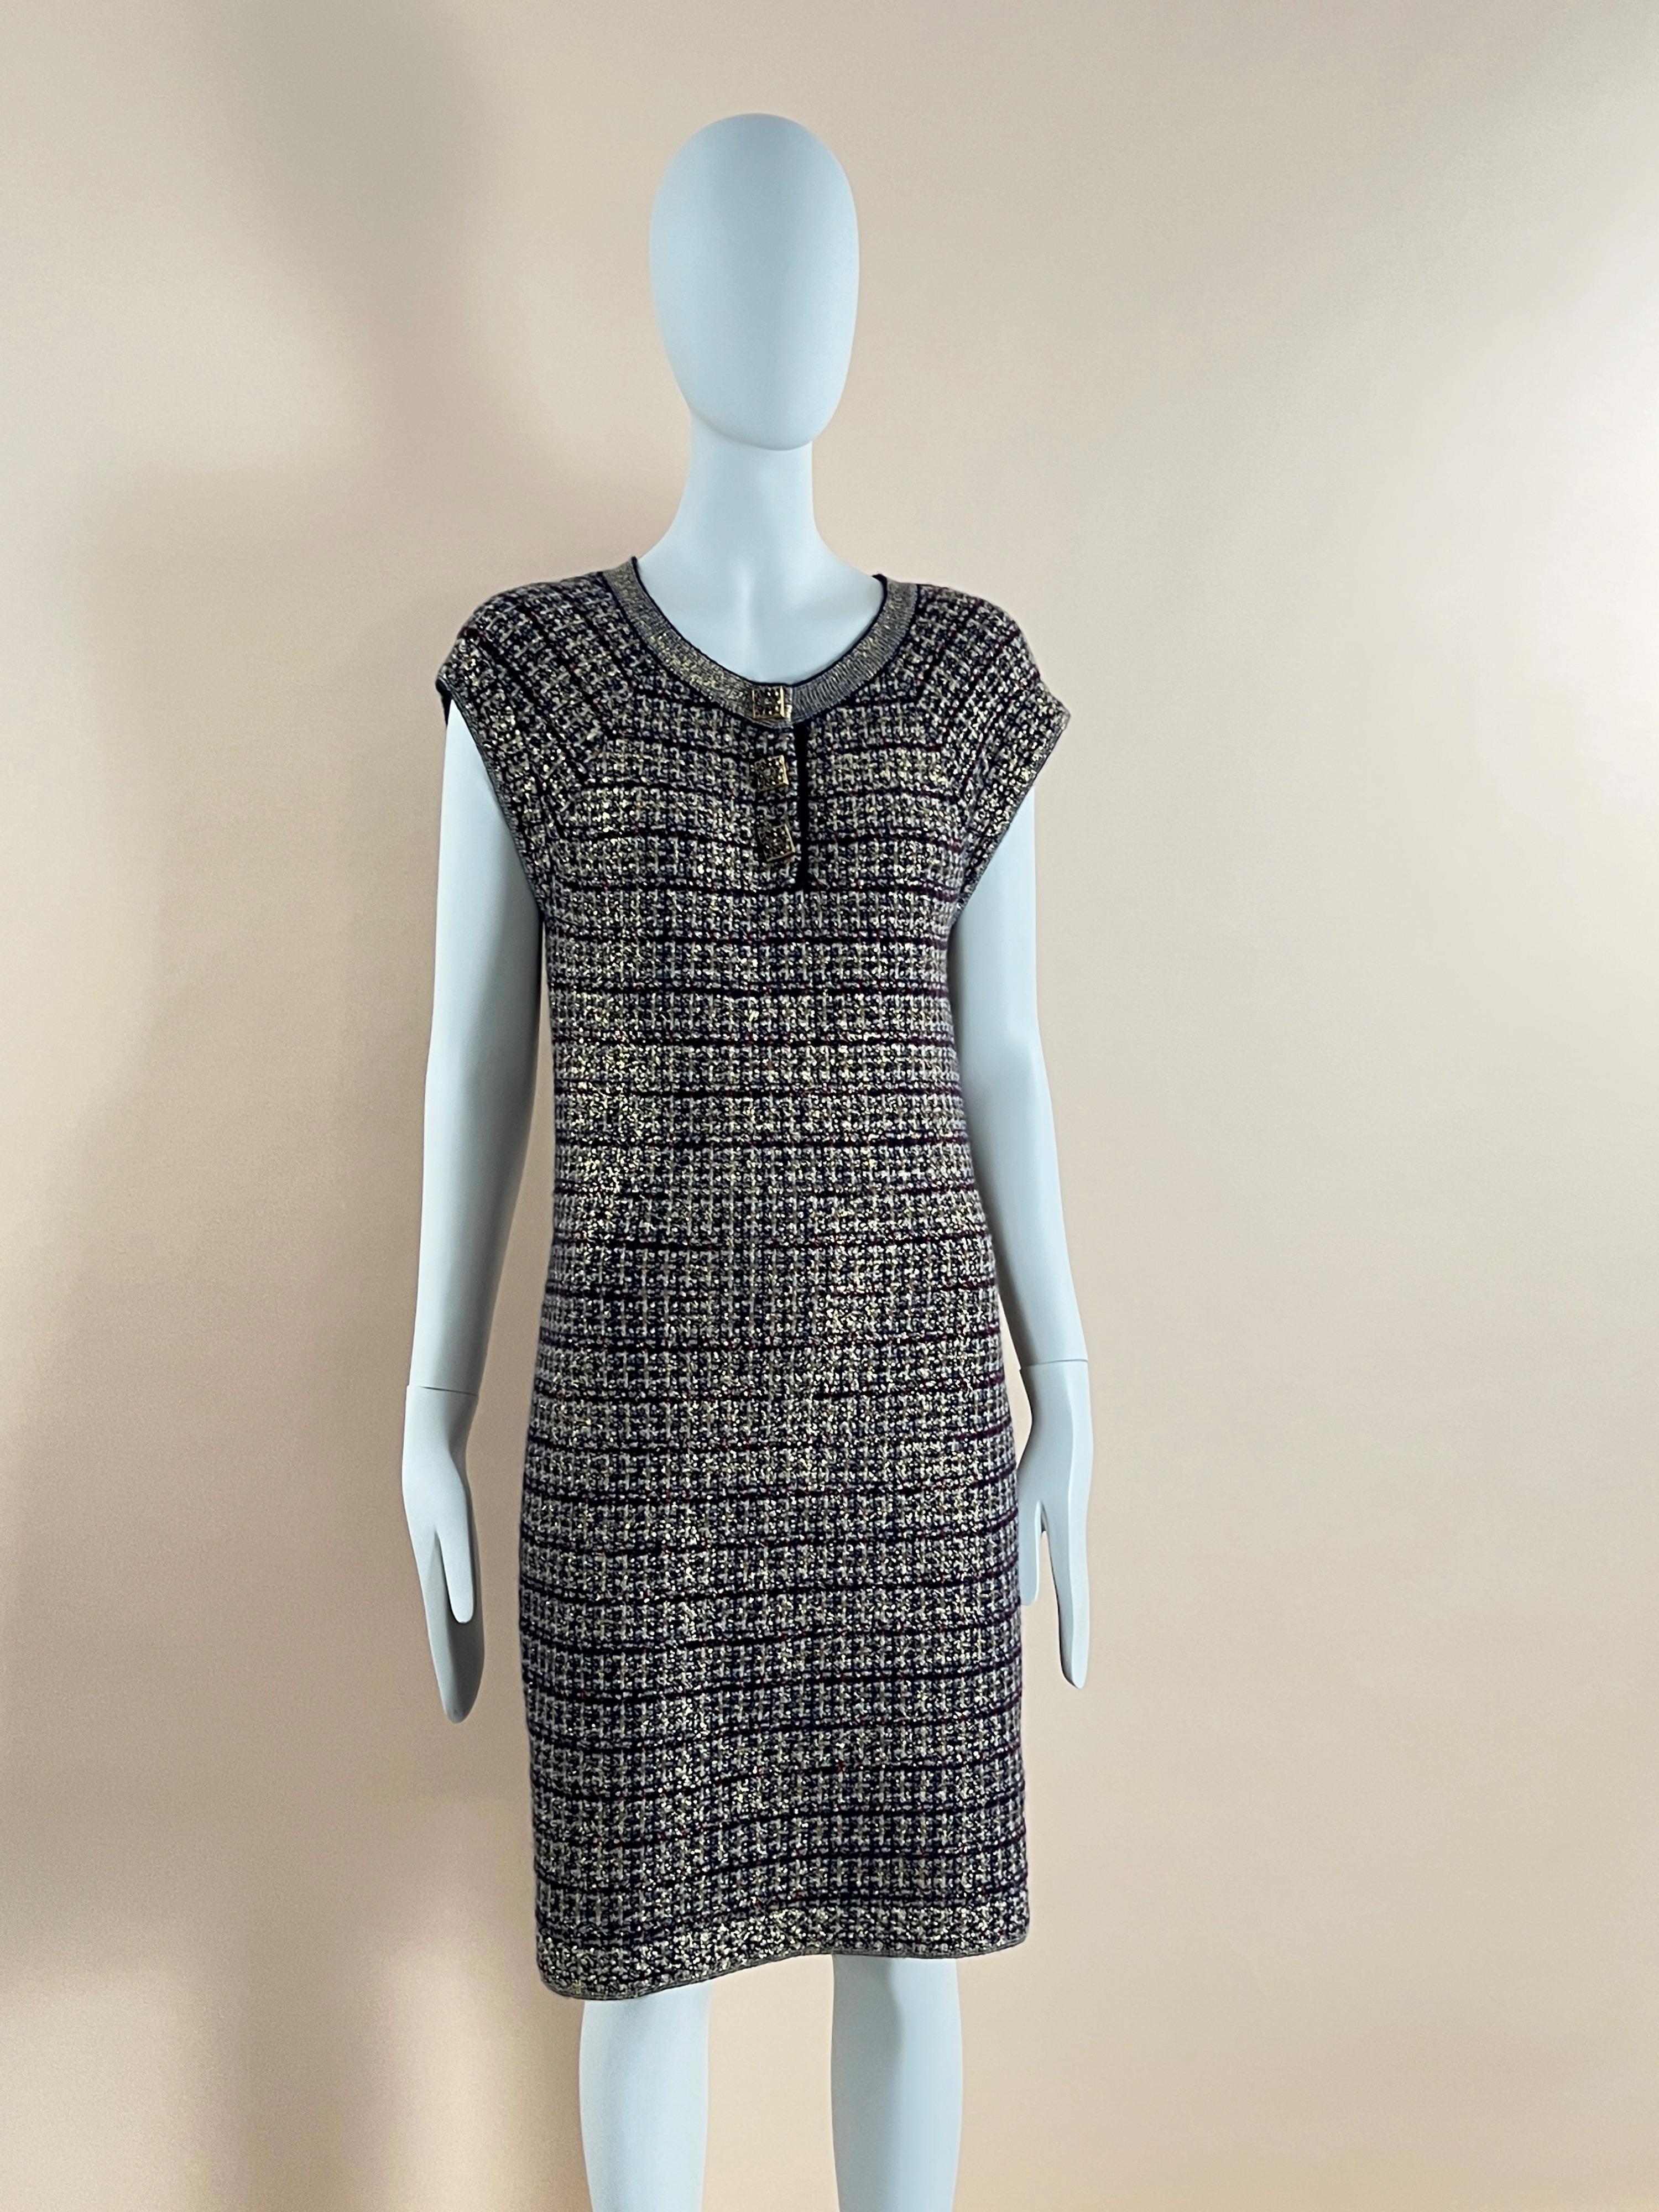 Chanel Byzance Collection Jewel Buttons Dress 5